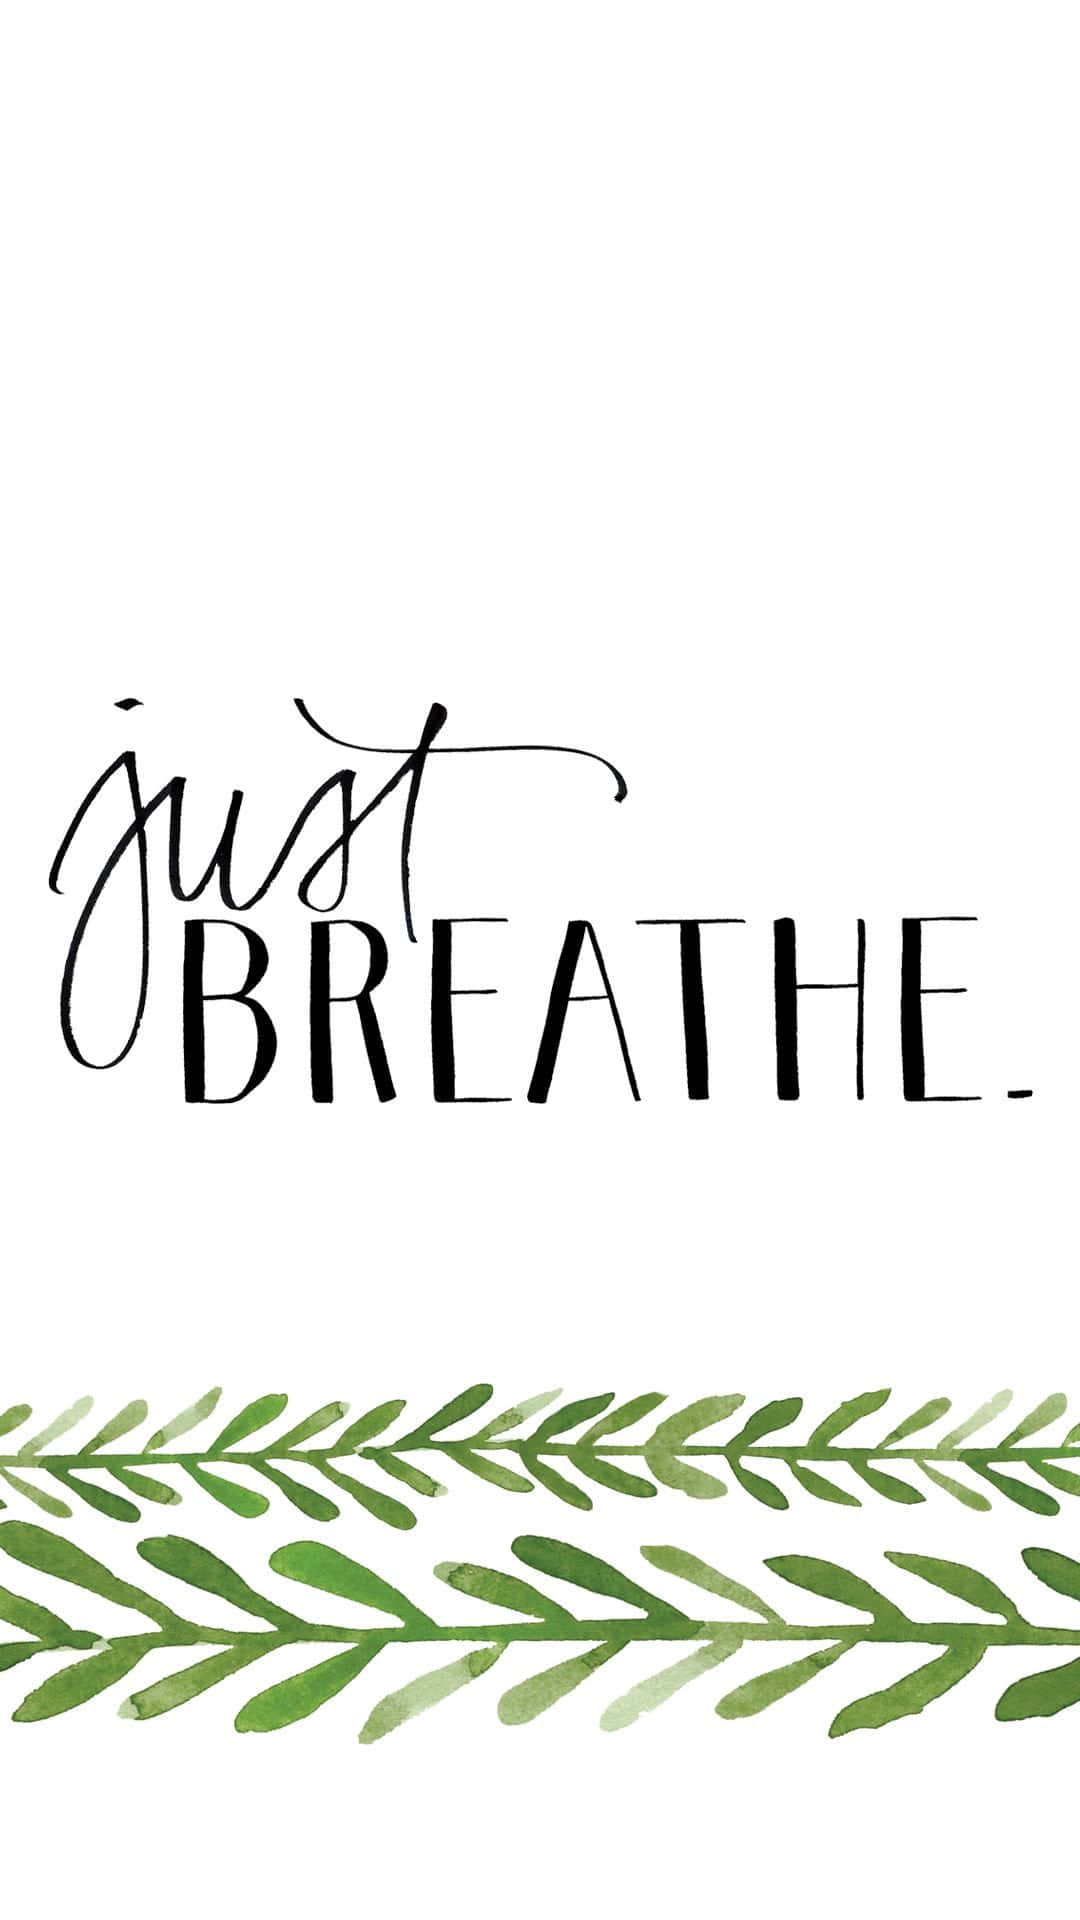 Just Breathe - Watercolor Print Background